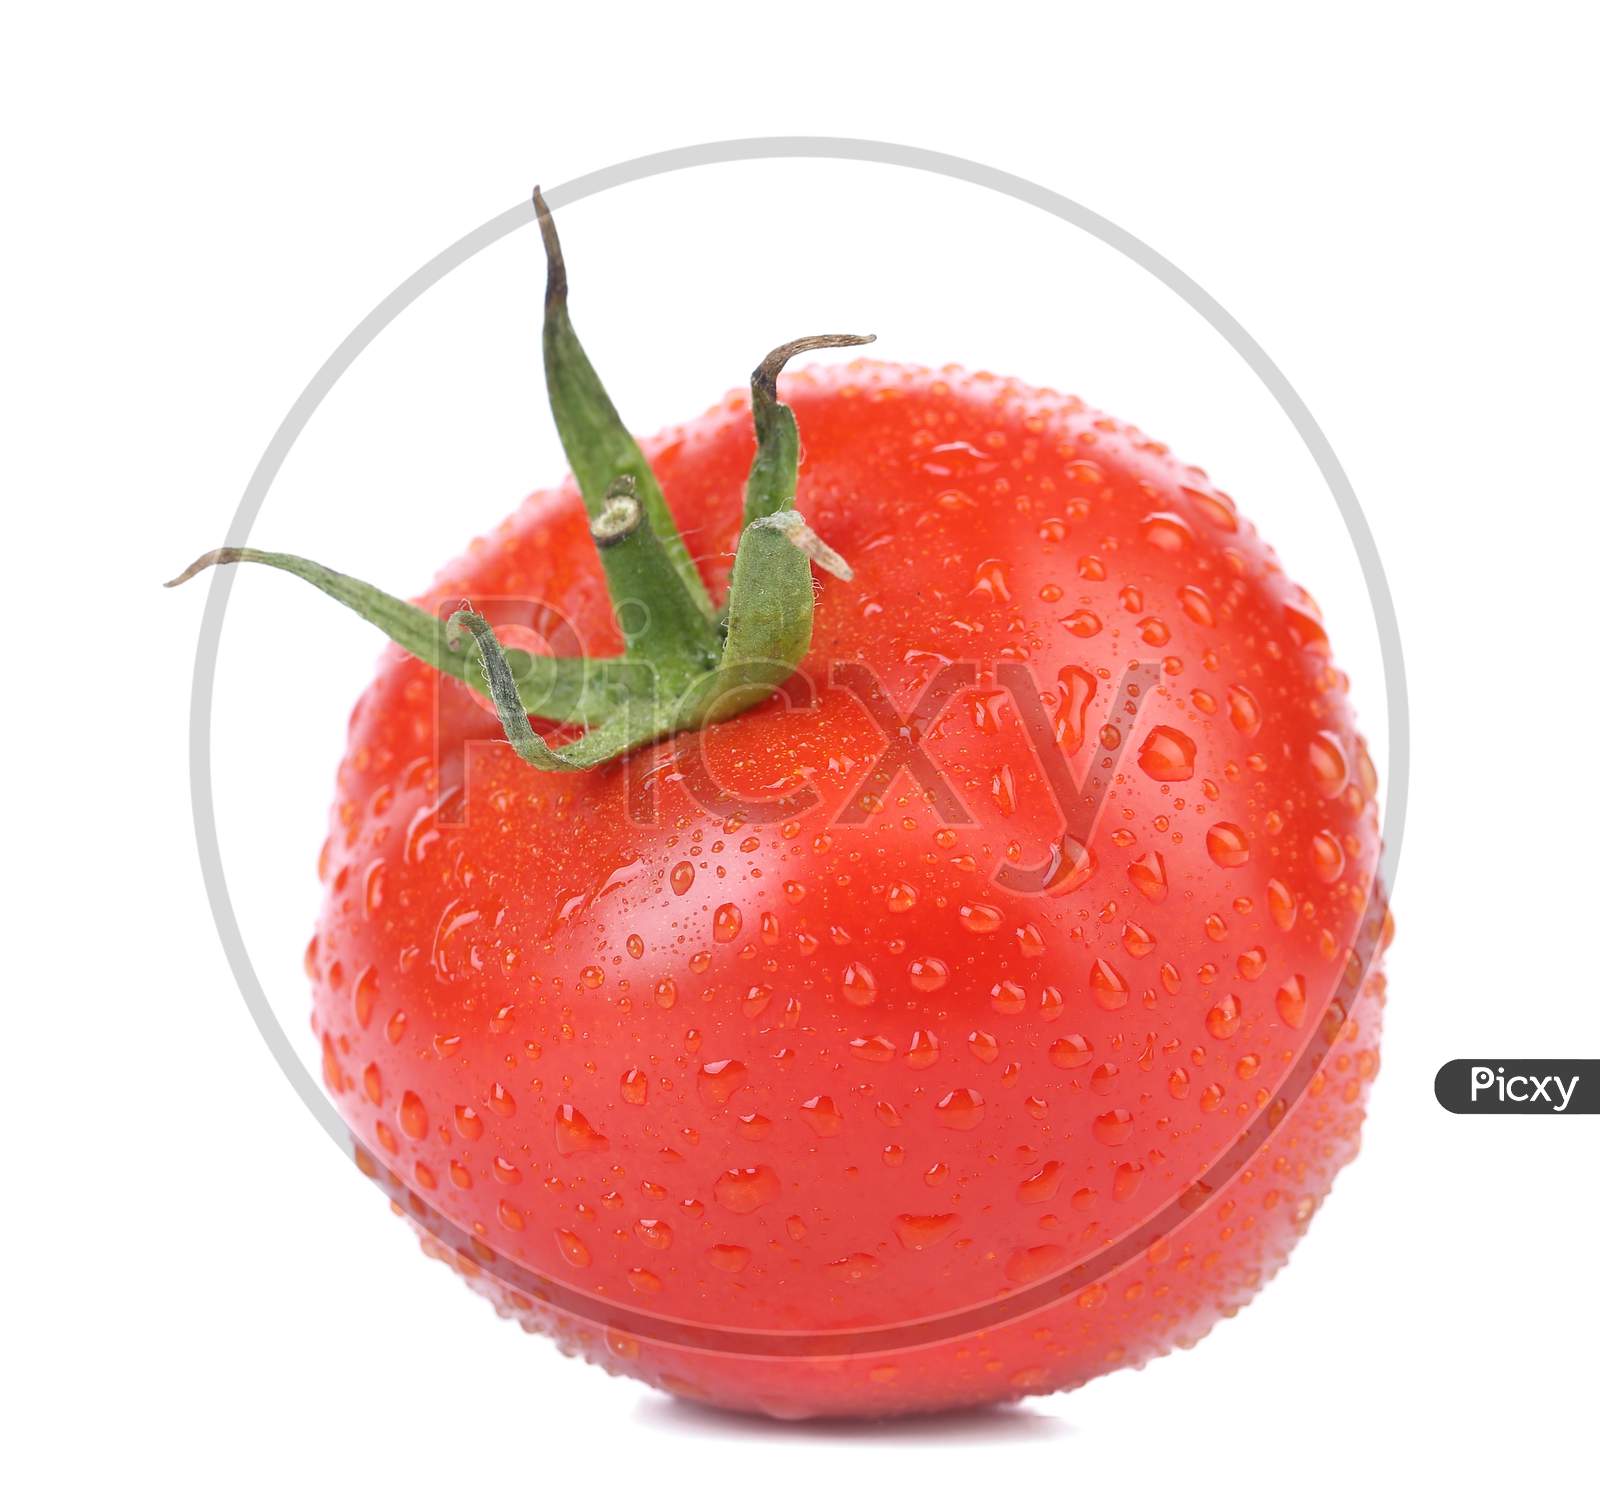 Fresh Tomato With Water Drops. Isolated On A White Background.